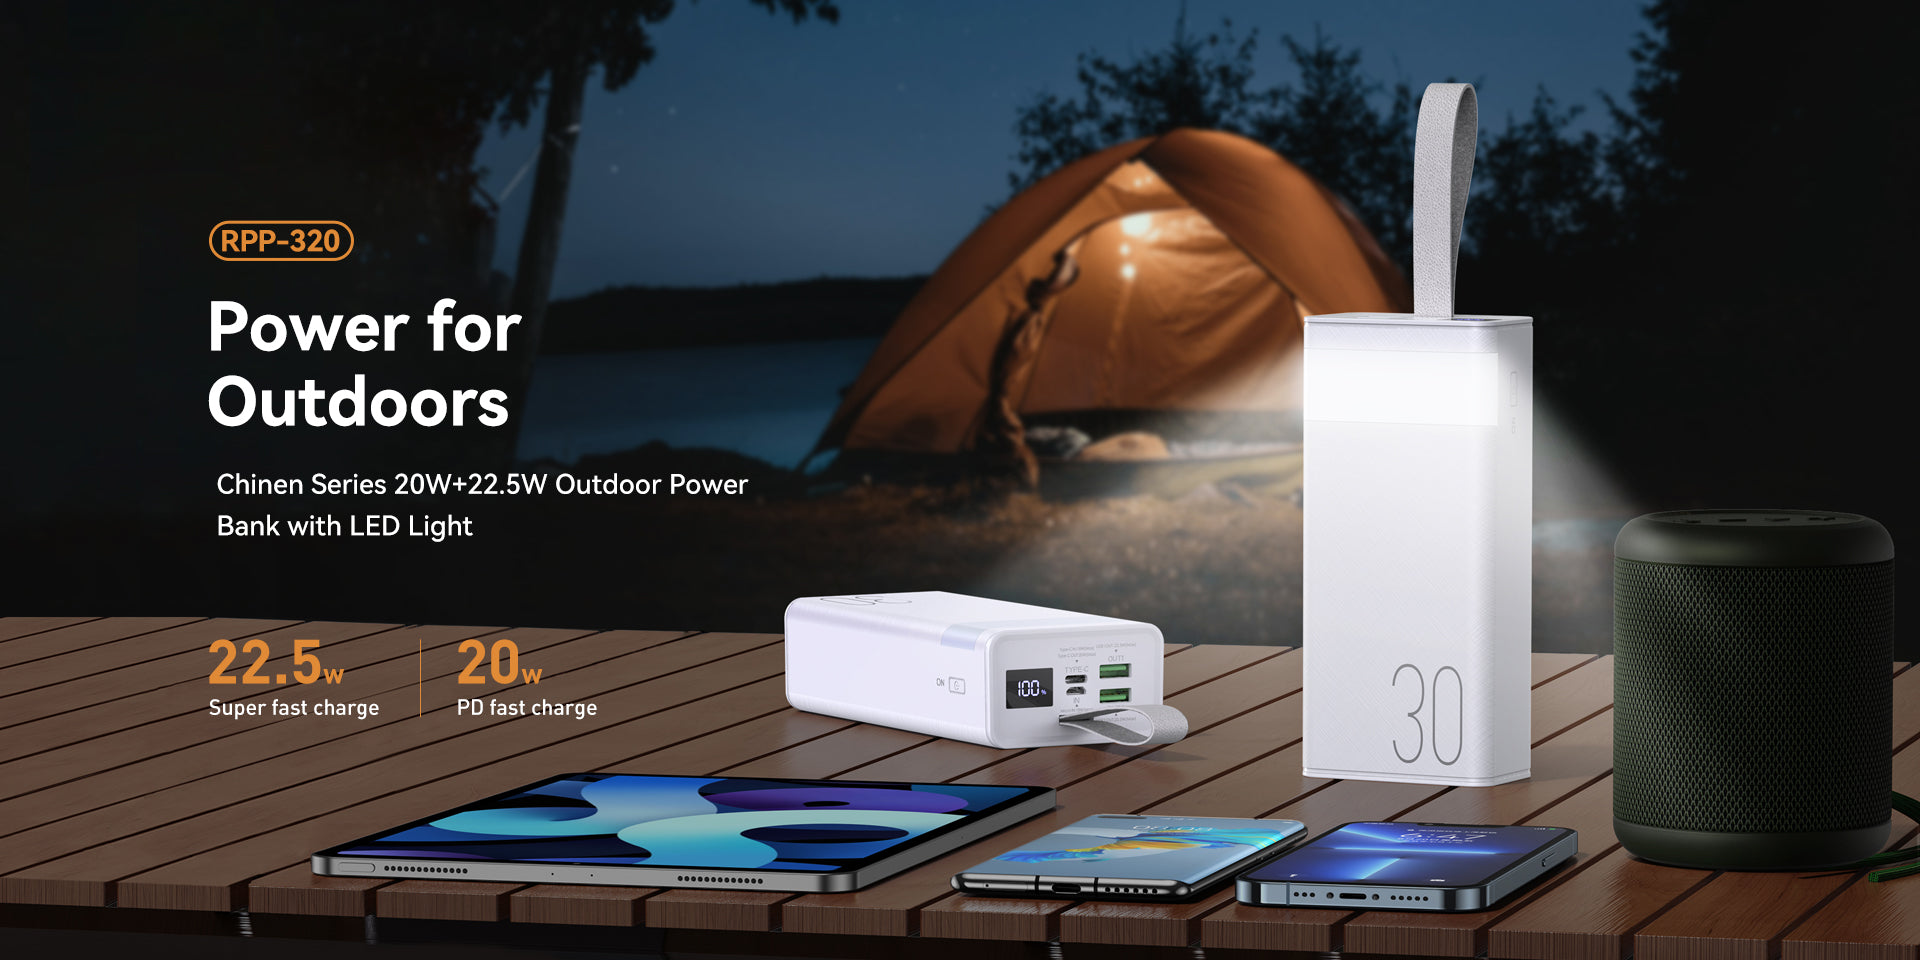 REMAX Chinen Series 20W+22.5W Fast Charging Power Bank with LED Light   30000mAh RPP-320